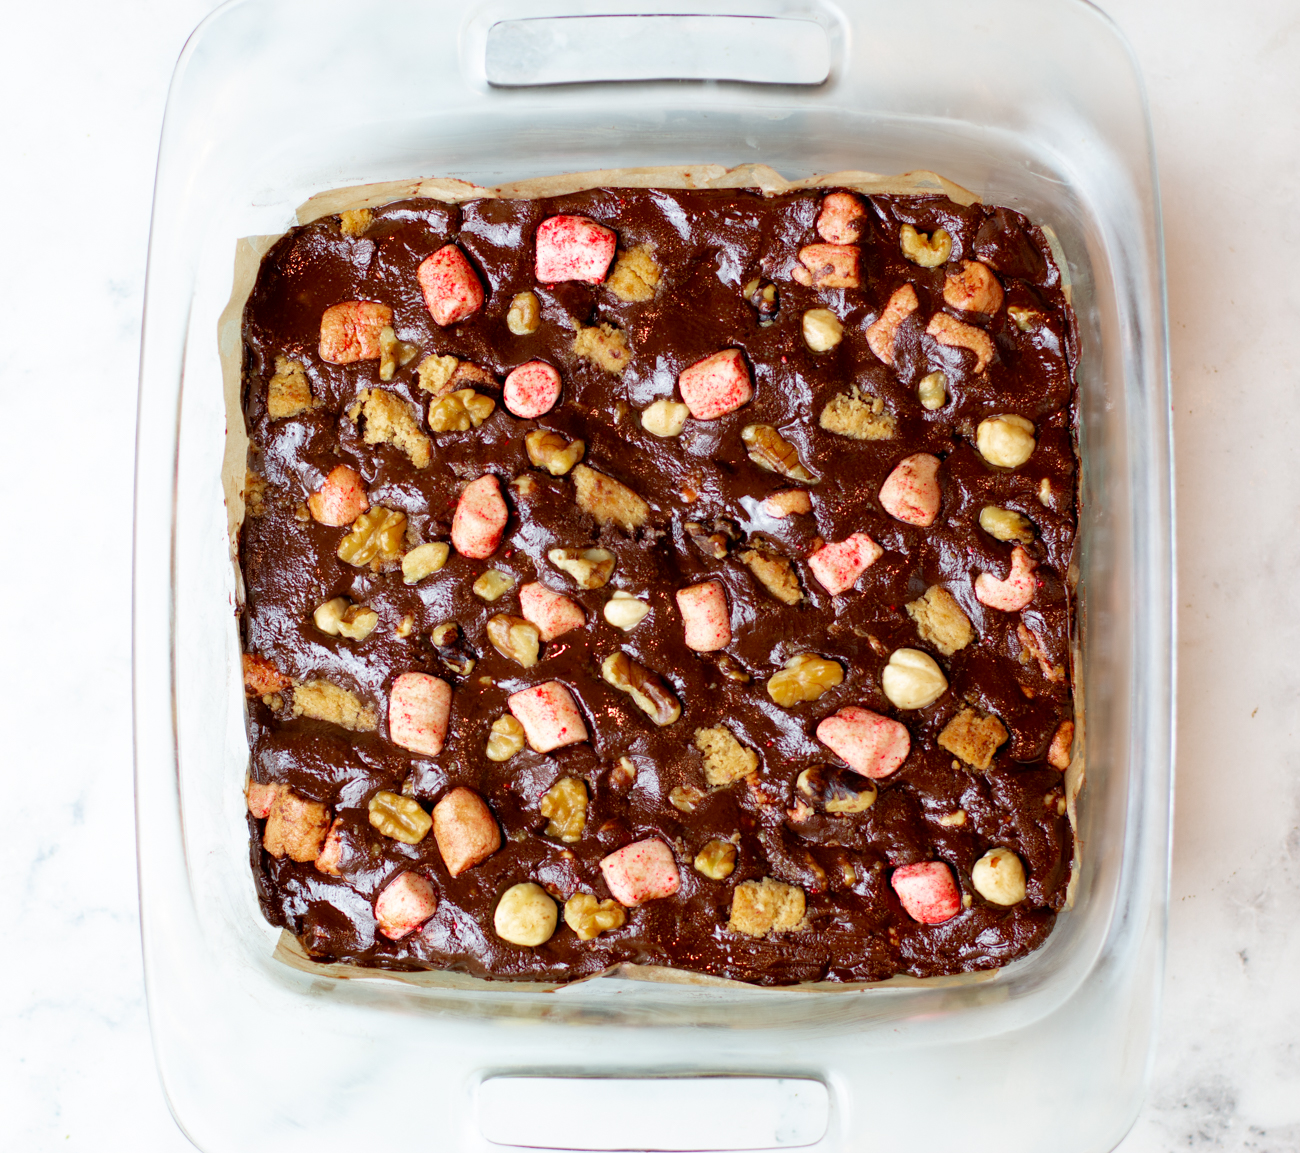 Spoon Rocky Road mixture into a square pan